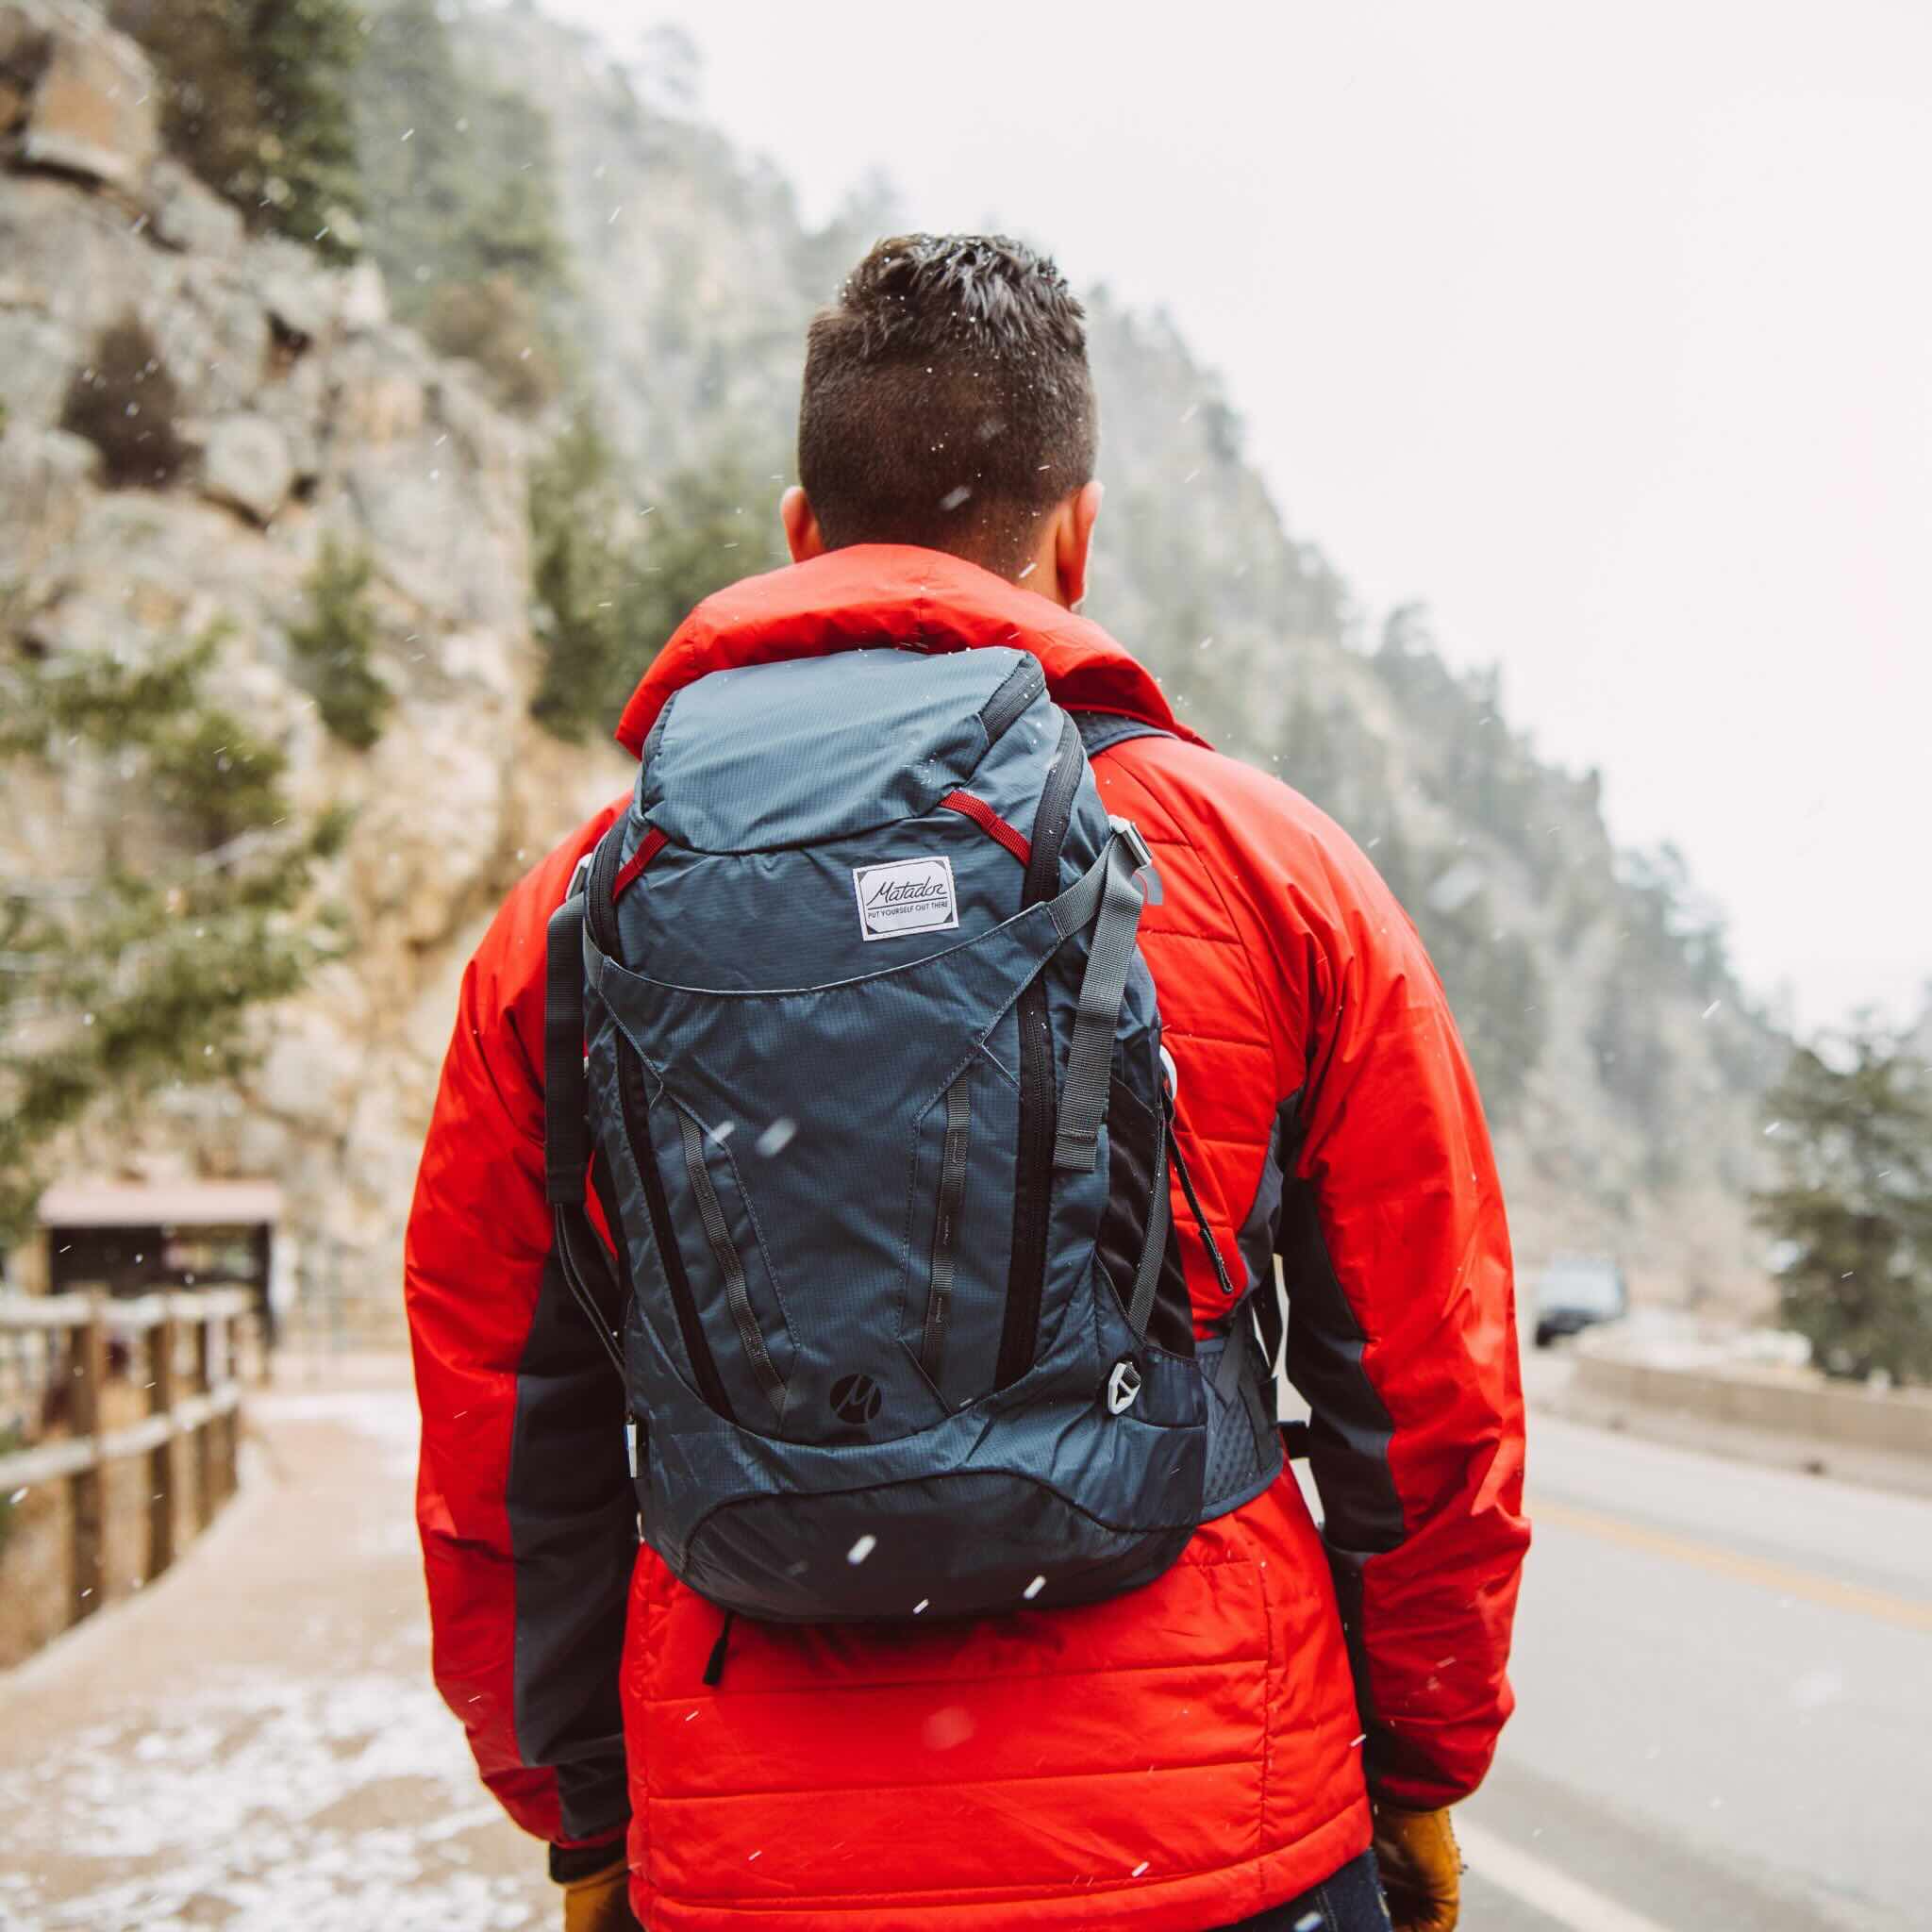 Hiking Backpack Review: Find the Perfect Gear for Your Outdoor Adventures